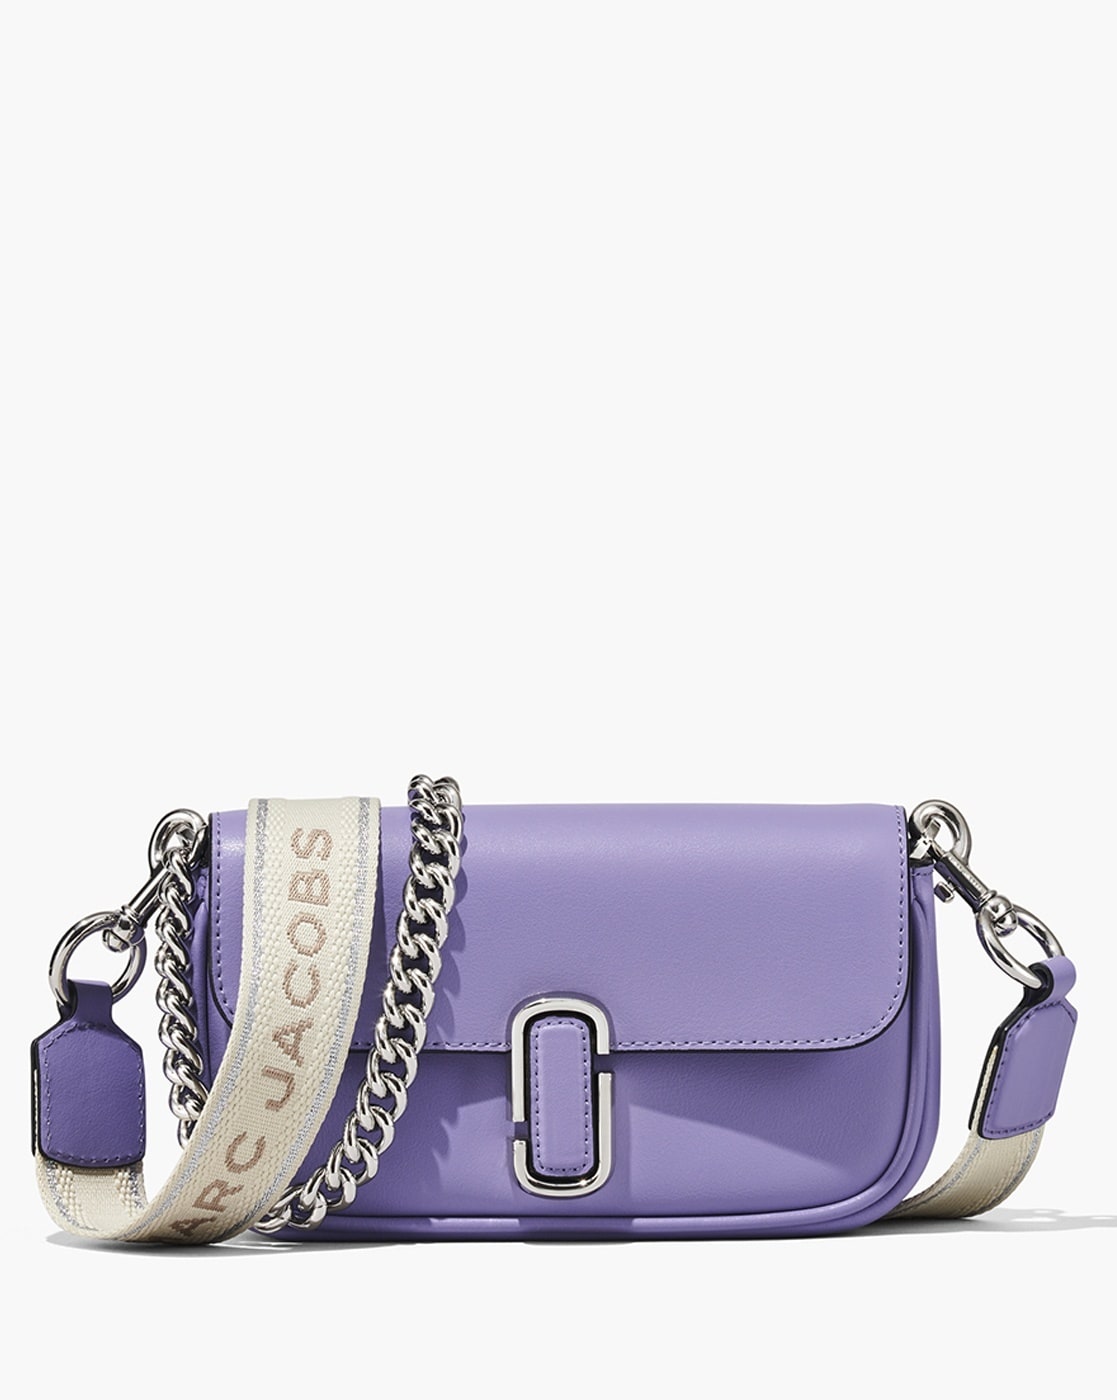 Urban Outfitters Uo Mini Messenger Bag - Dark Purple One Size